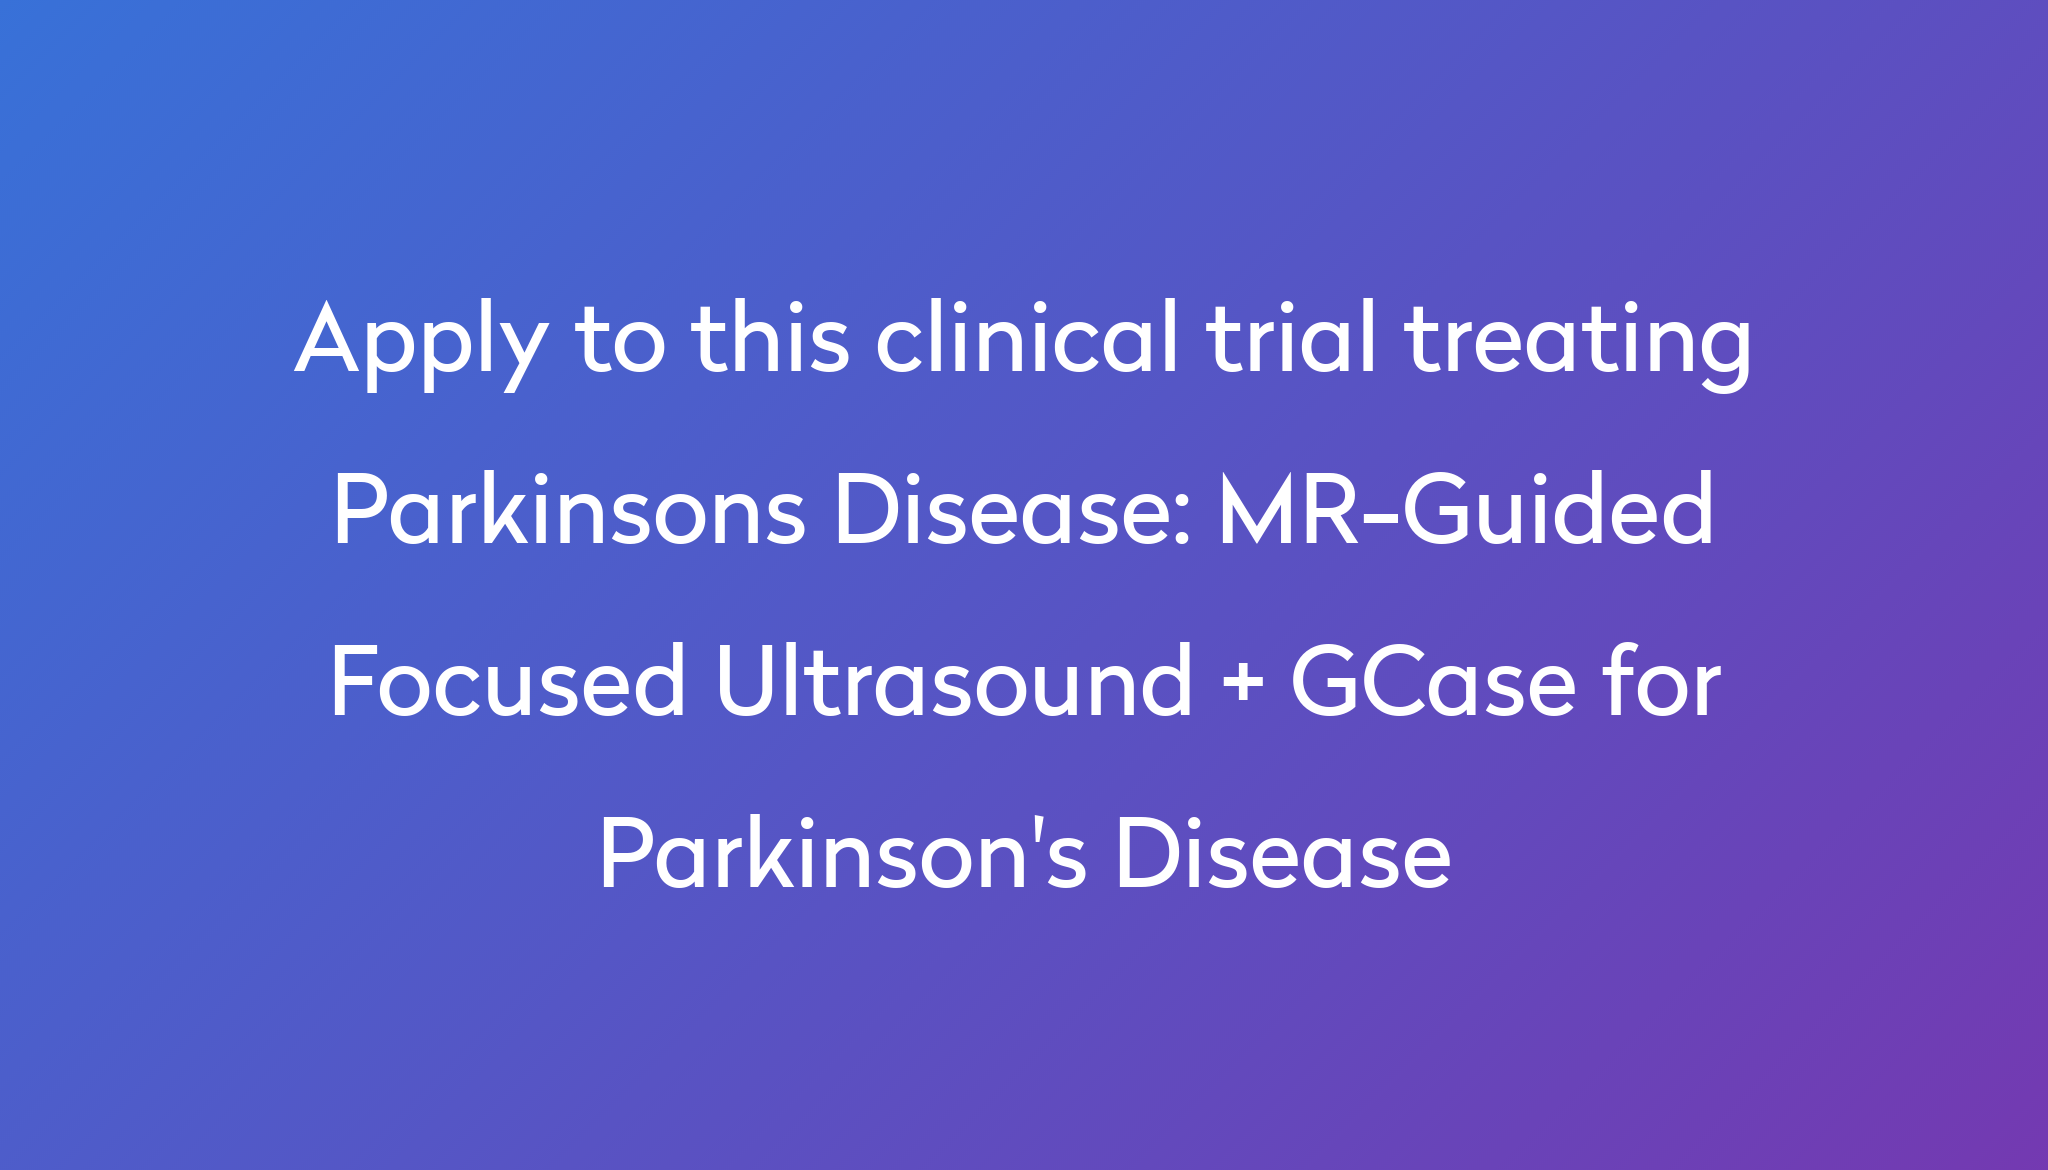 MRGuided Focused Ultrasound + GCase for Parkinson's Disease Clinical